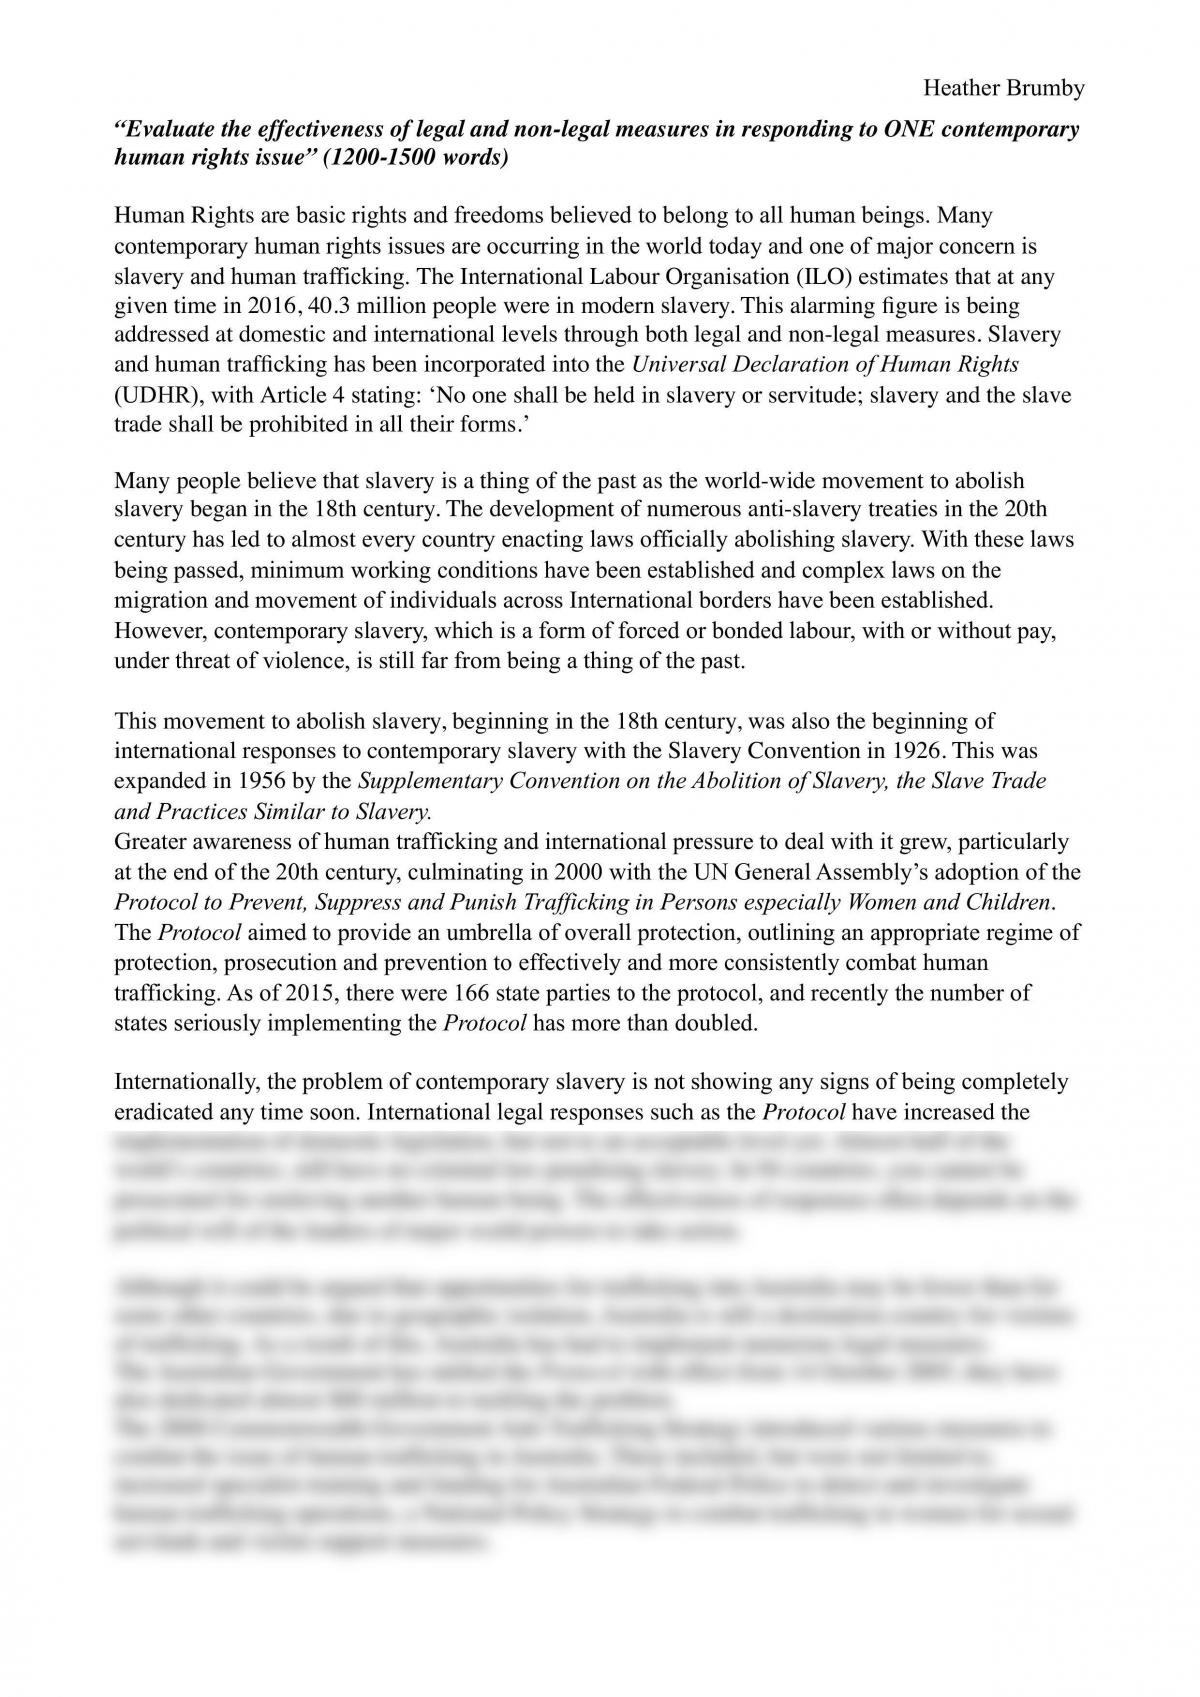 Human Rights (Contemporary Issue: Modern Slavery) Essay - Page 1